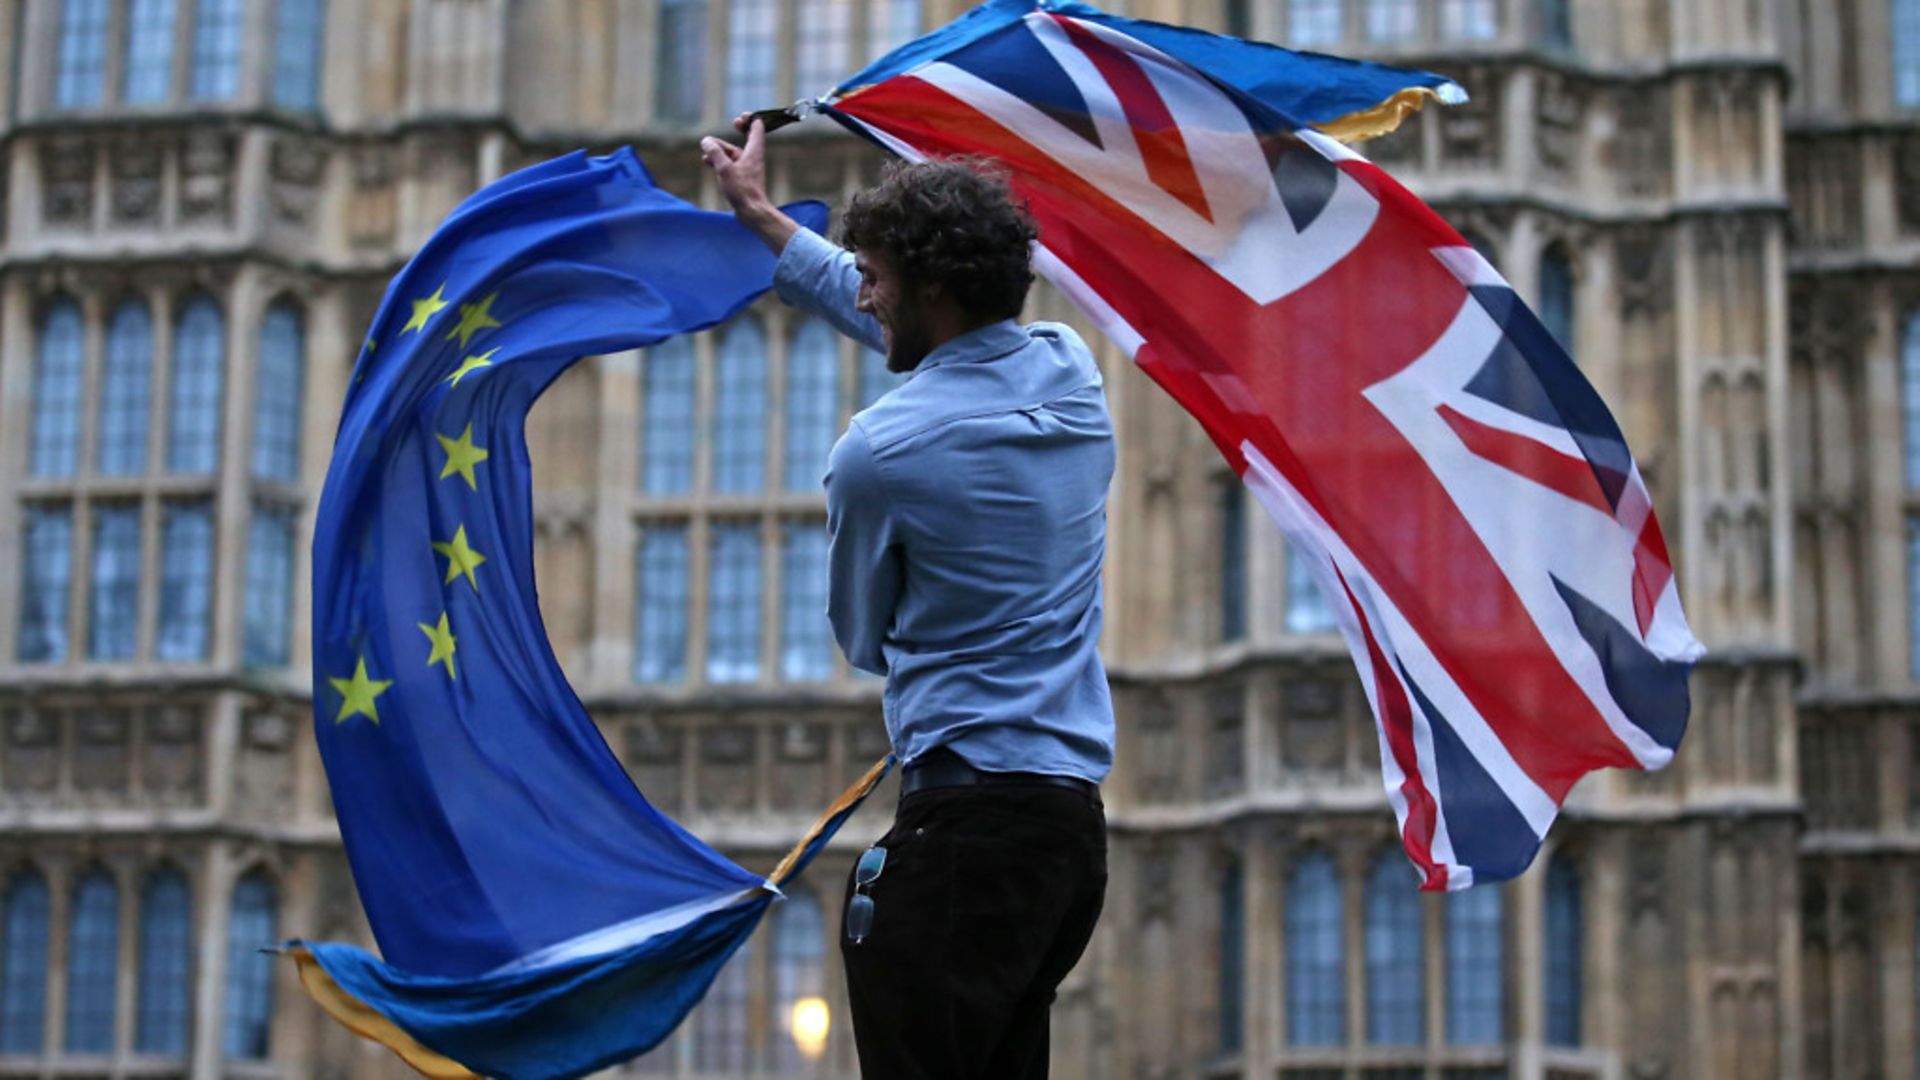 A man waves both a Union flag and a European flag together on College Green outside the Houses of Parliament - Credit: AFP via Getty Images